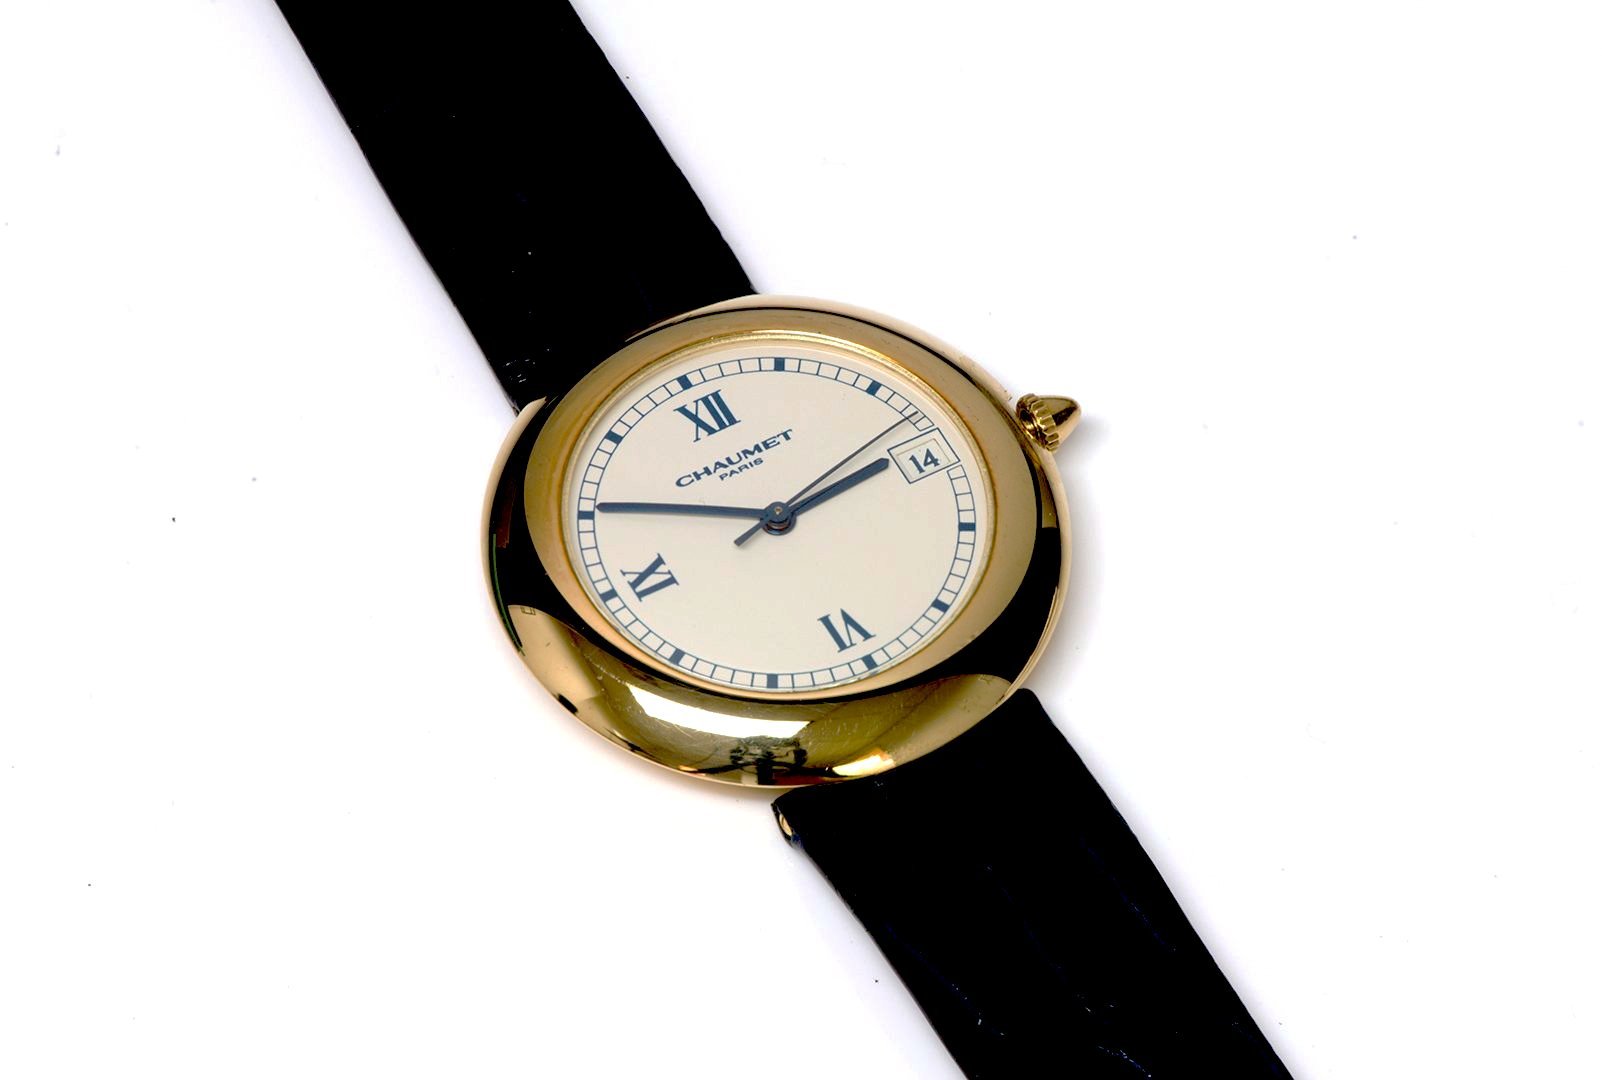 Chaumet Paris 13A-684 18K Gold Automatic Watch - DSF Antique Jewelry